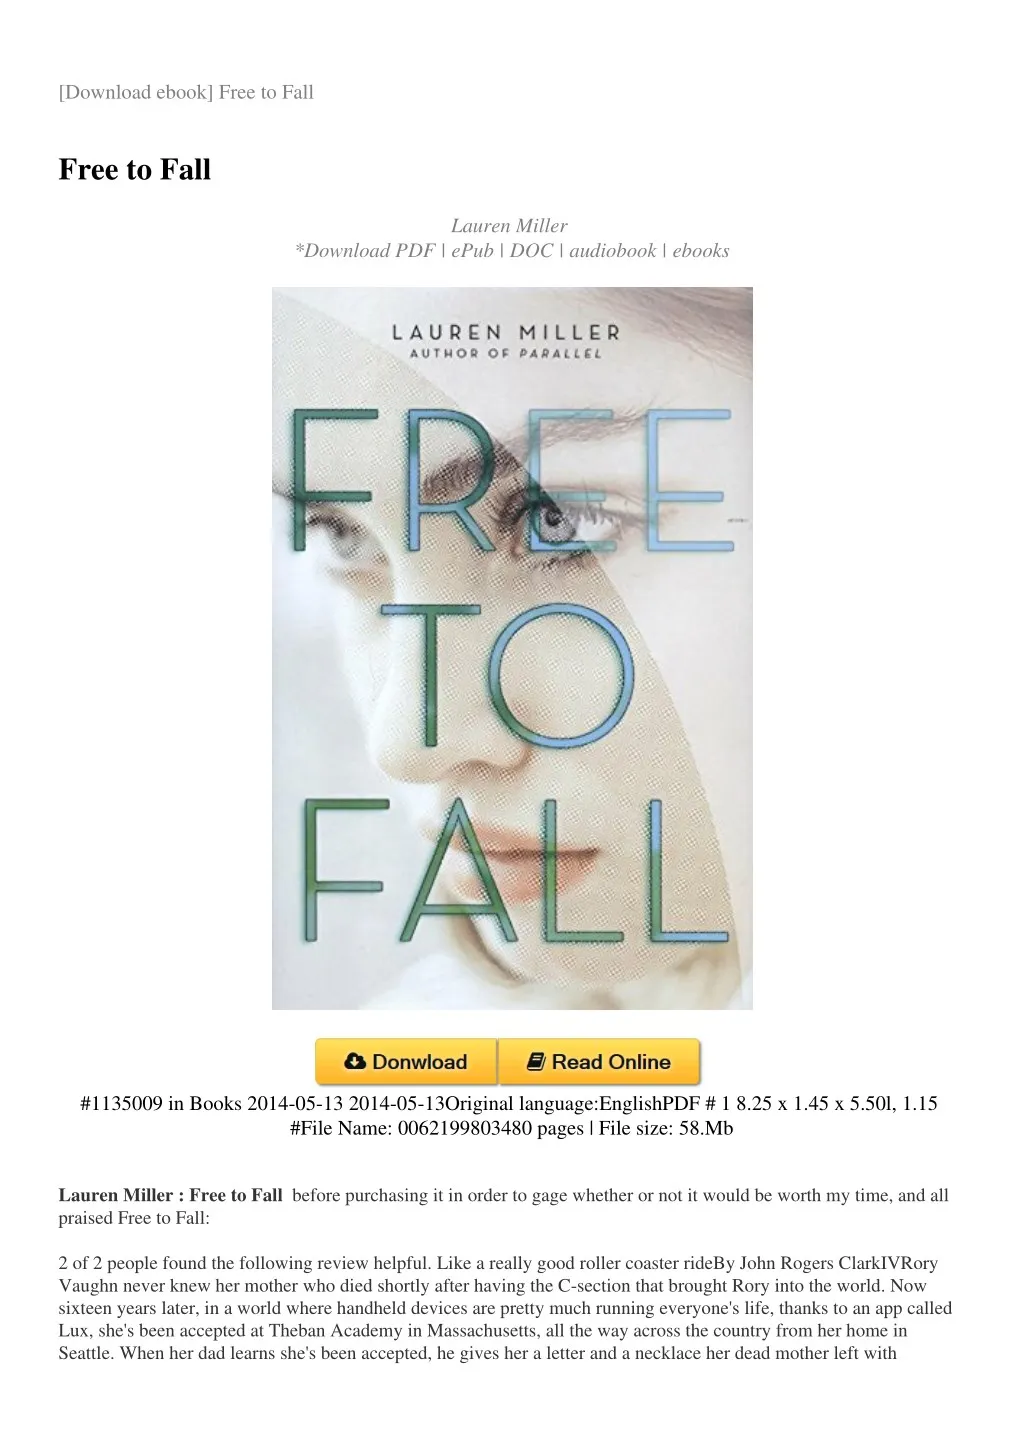 download ebook free to fall